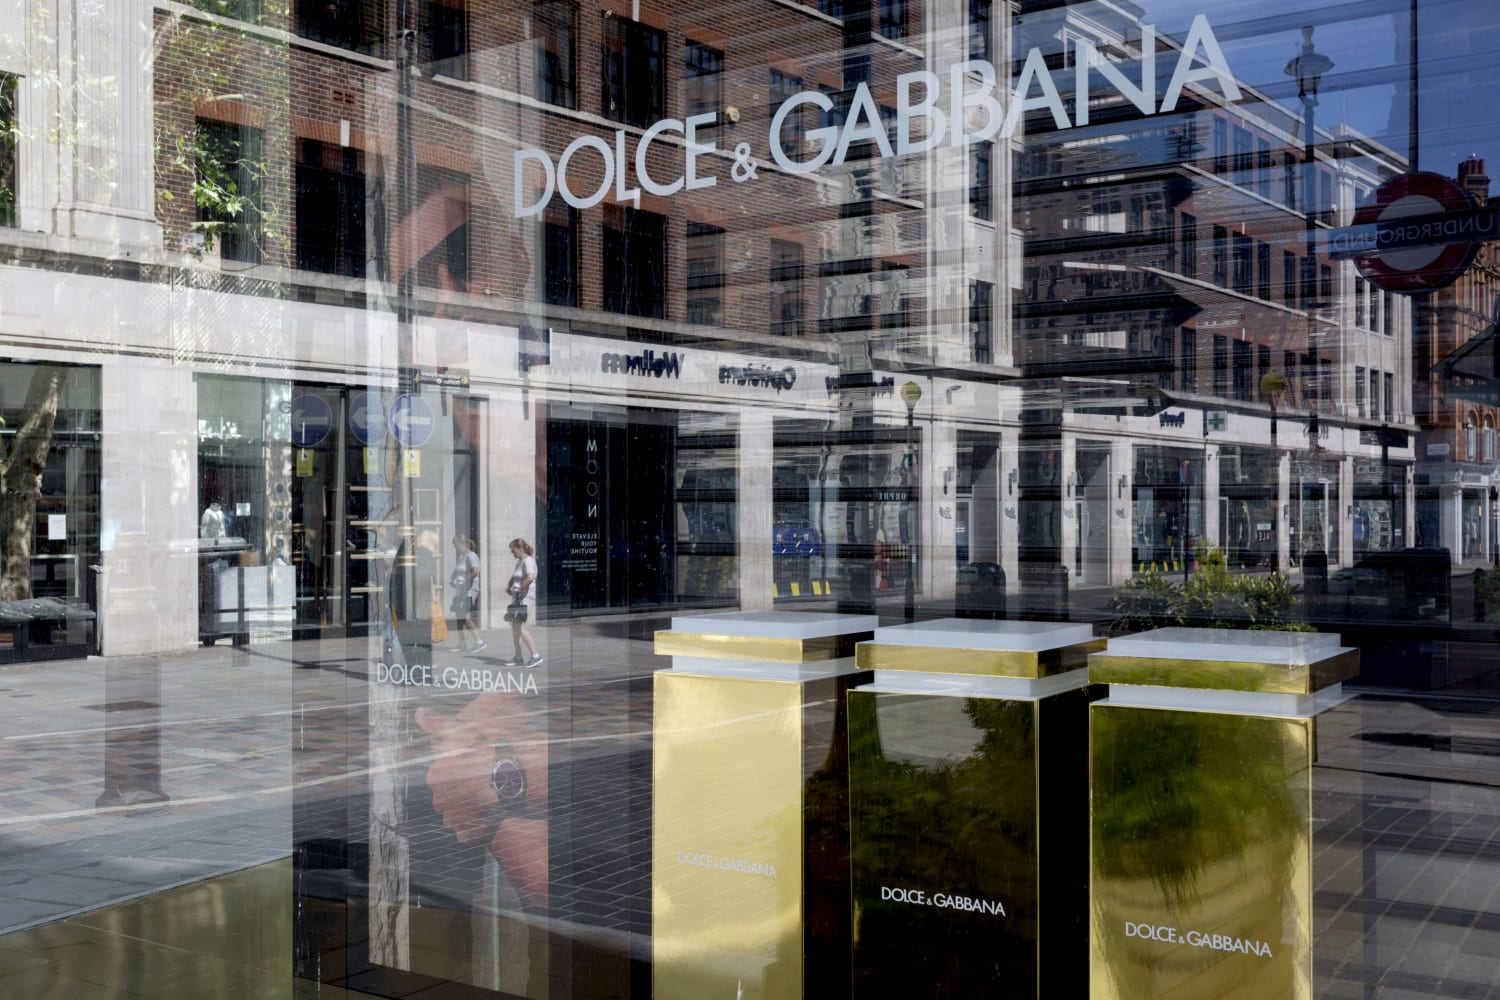 Dolce&Gabbana announces it will drop use of animal fur starting this year